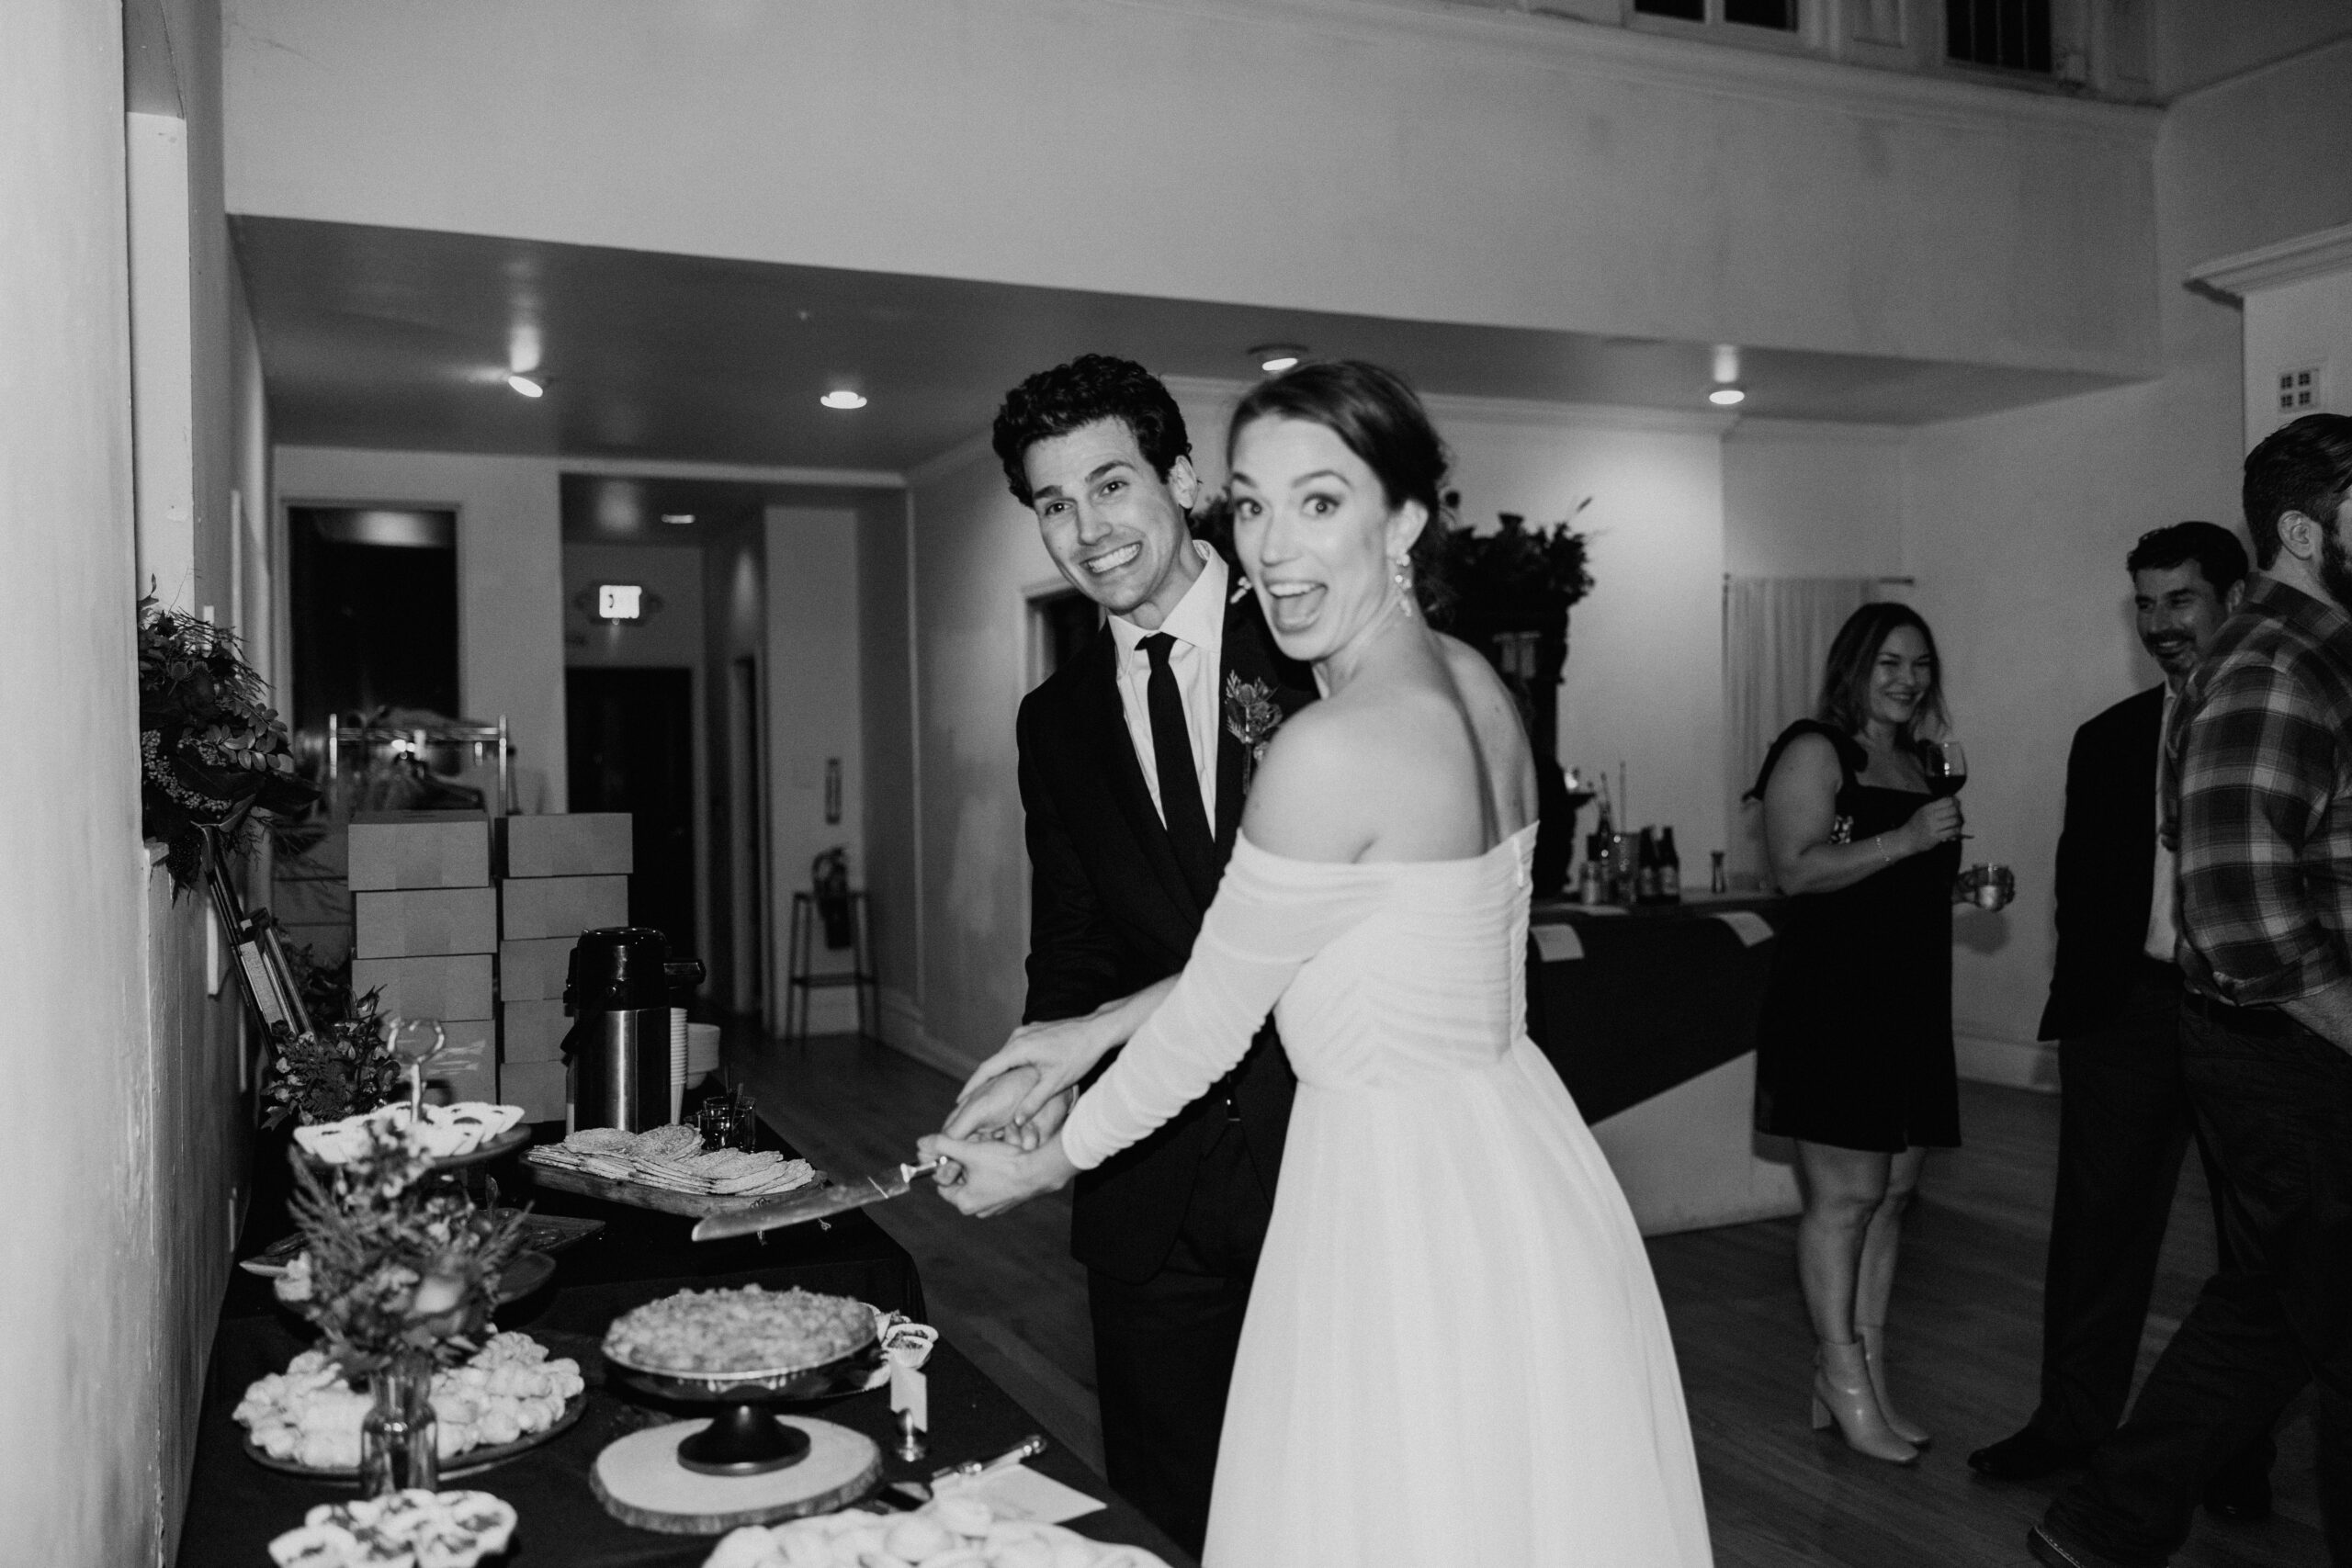 A black and white photo of a bride and groom cutting the cake.